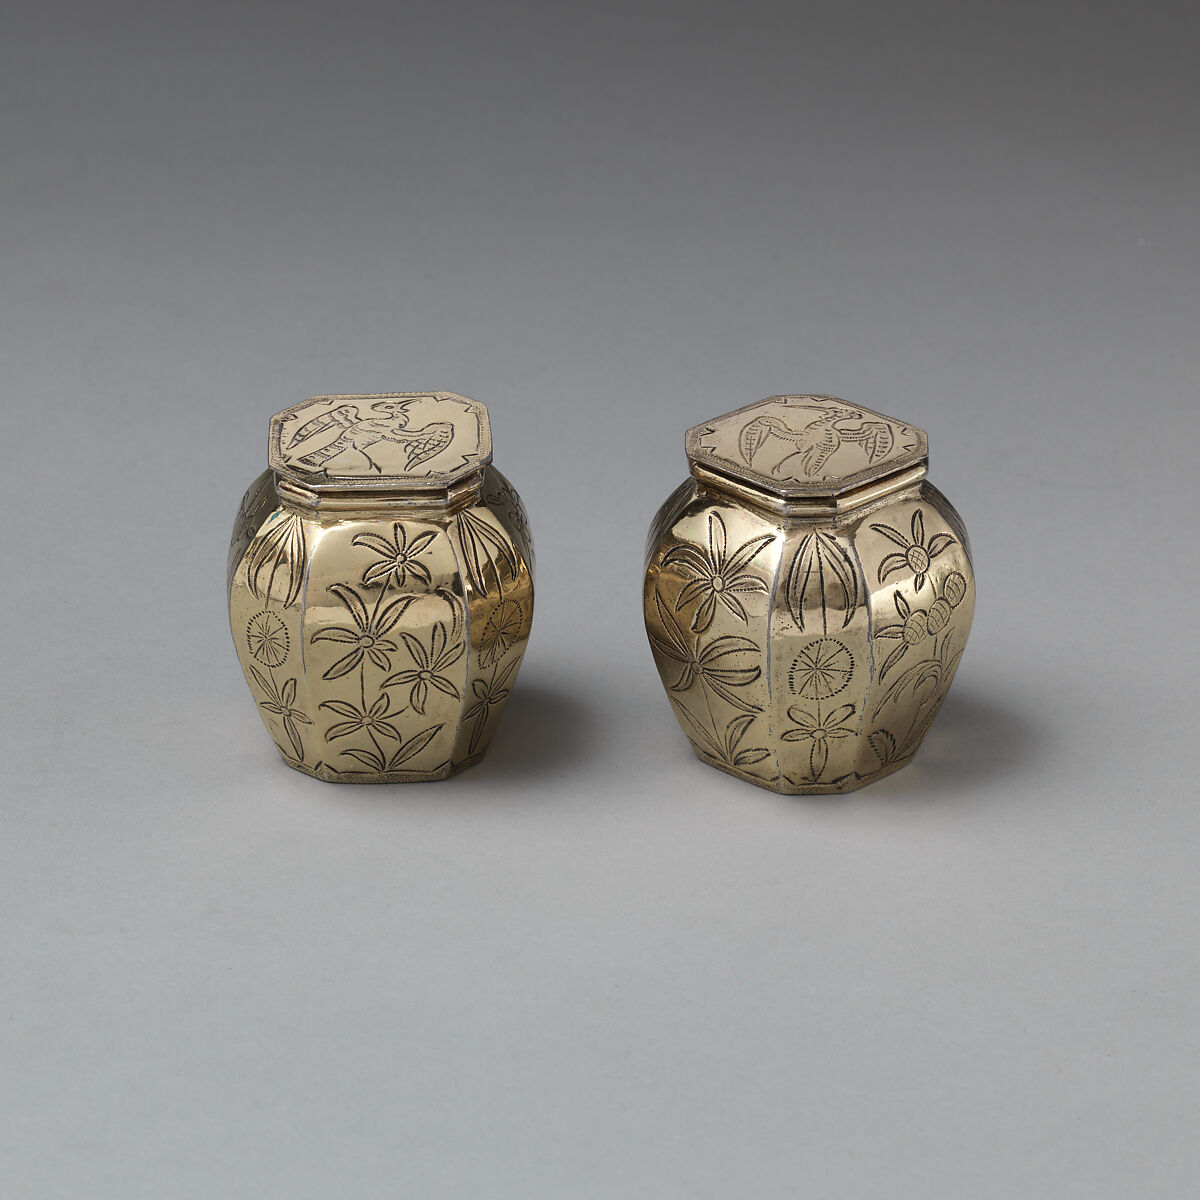 Pair of pomade pots (part of a toilet service), Thomas Jenkins, Silver gilt, British, London